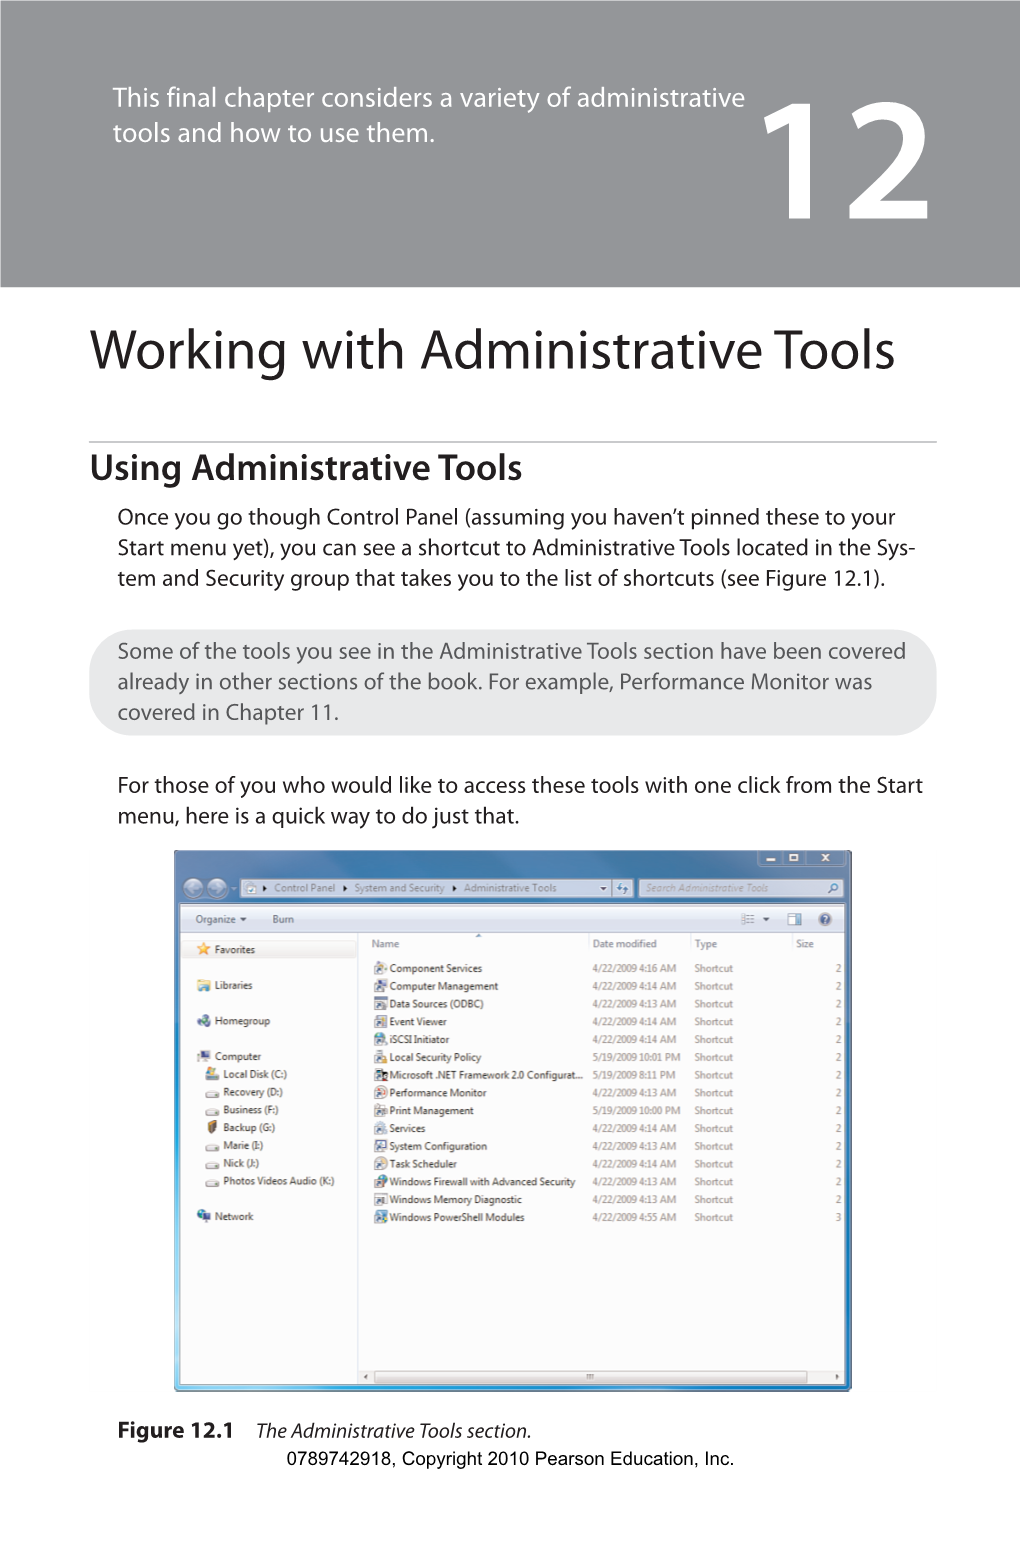 Working with Administrative Tools